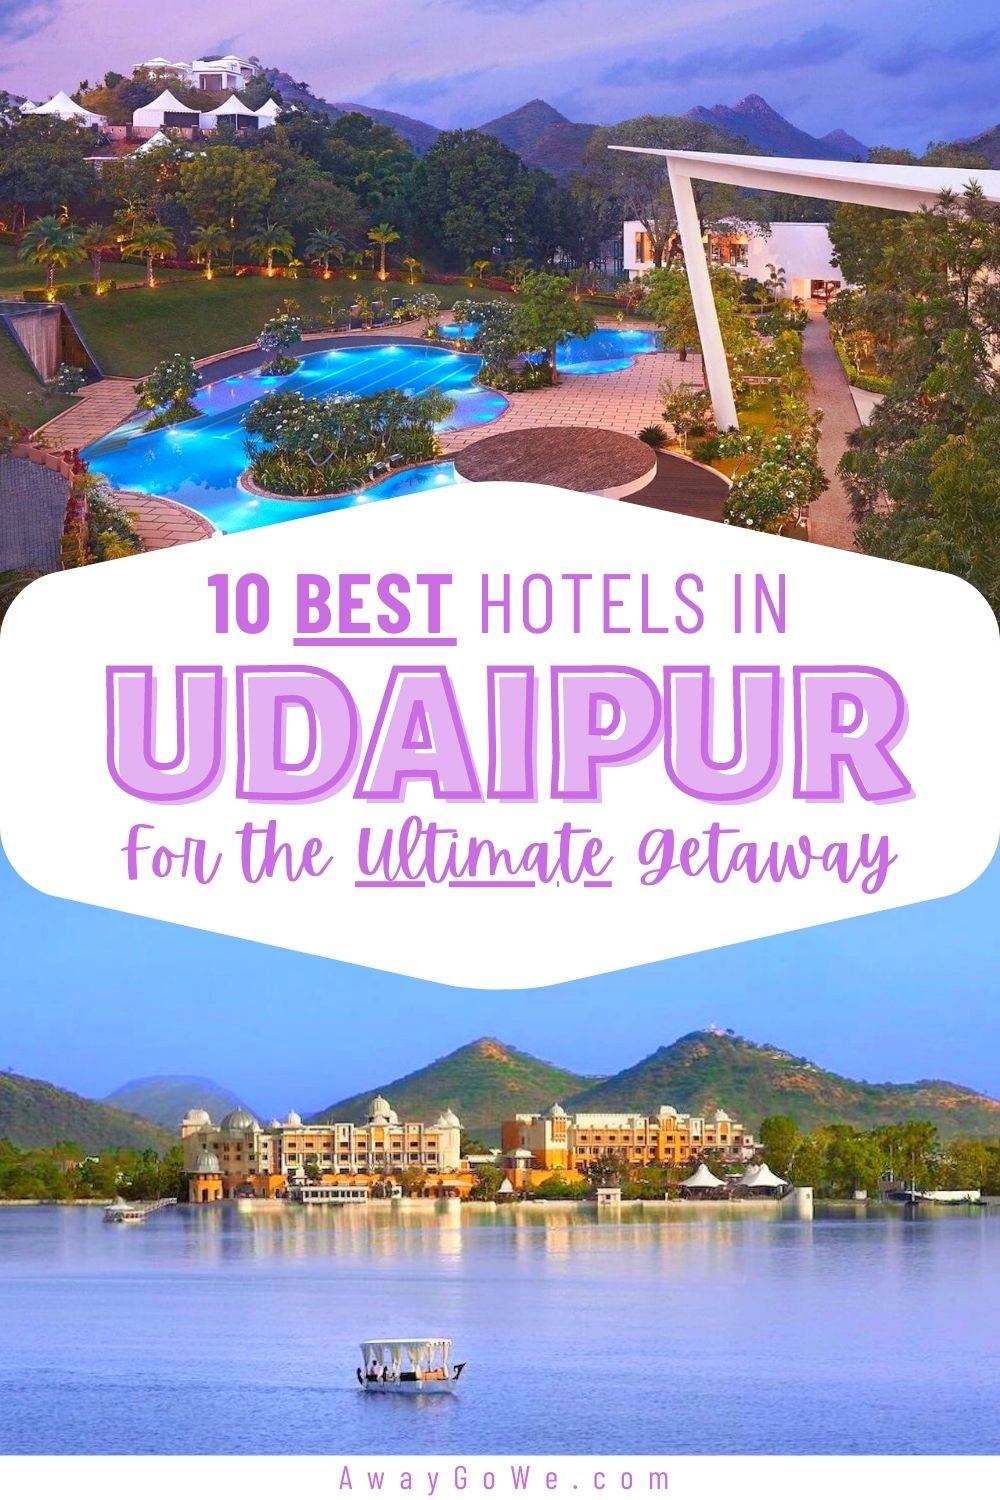 10 Best Hotels in Udaipur for the Ultimate Getaway (2022)